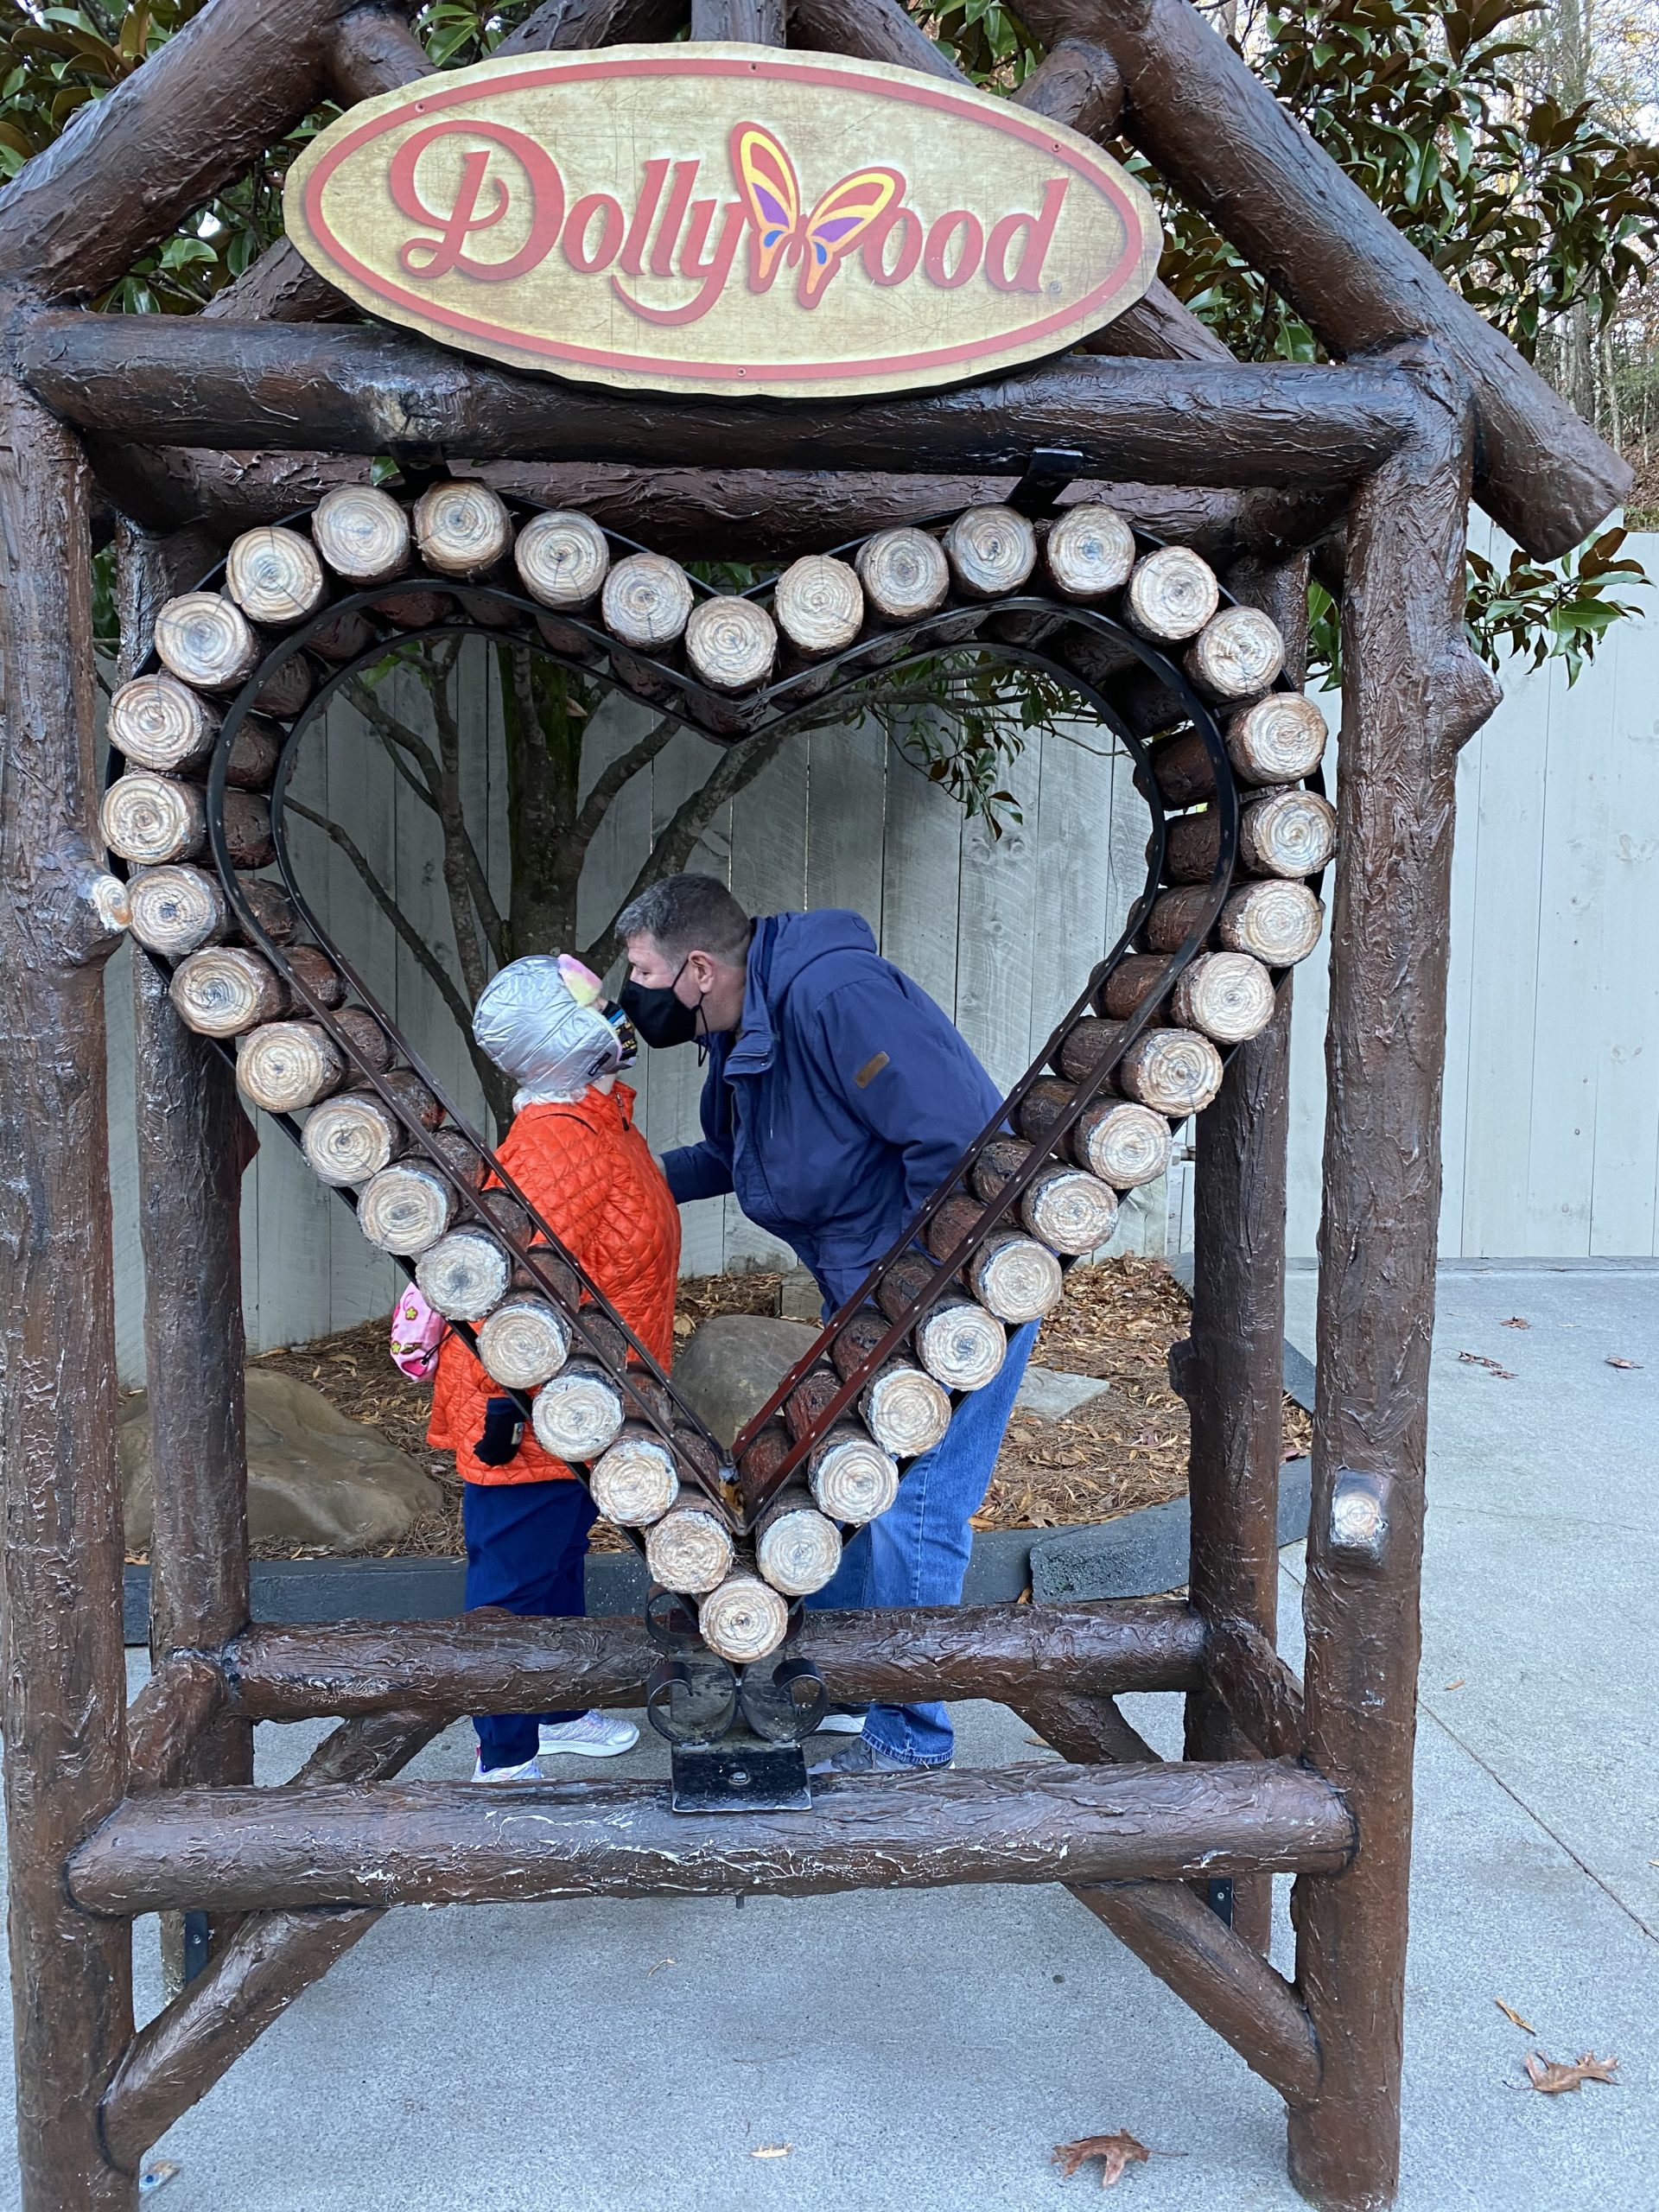 a man and child kissing in a heart shaped structure